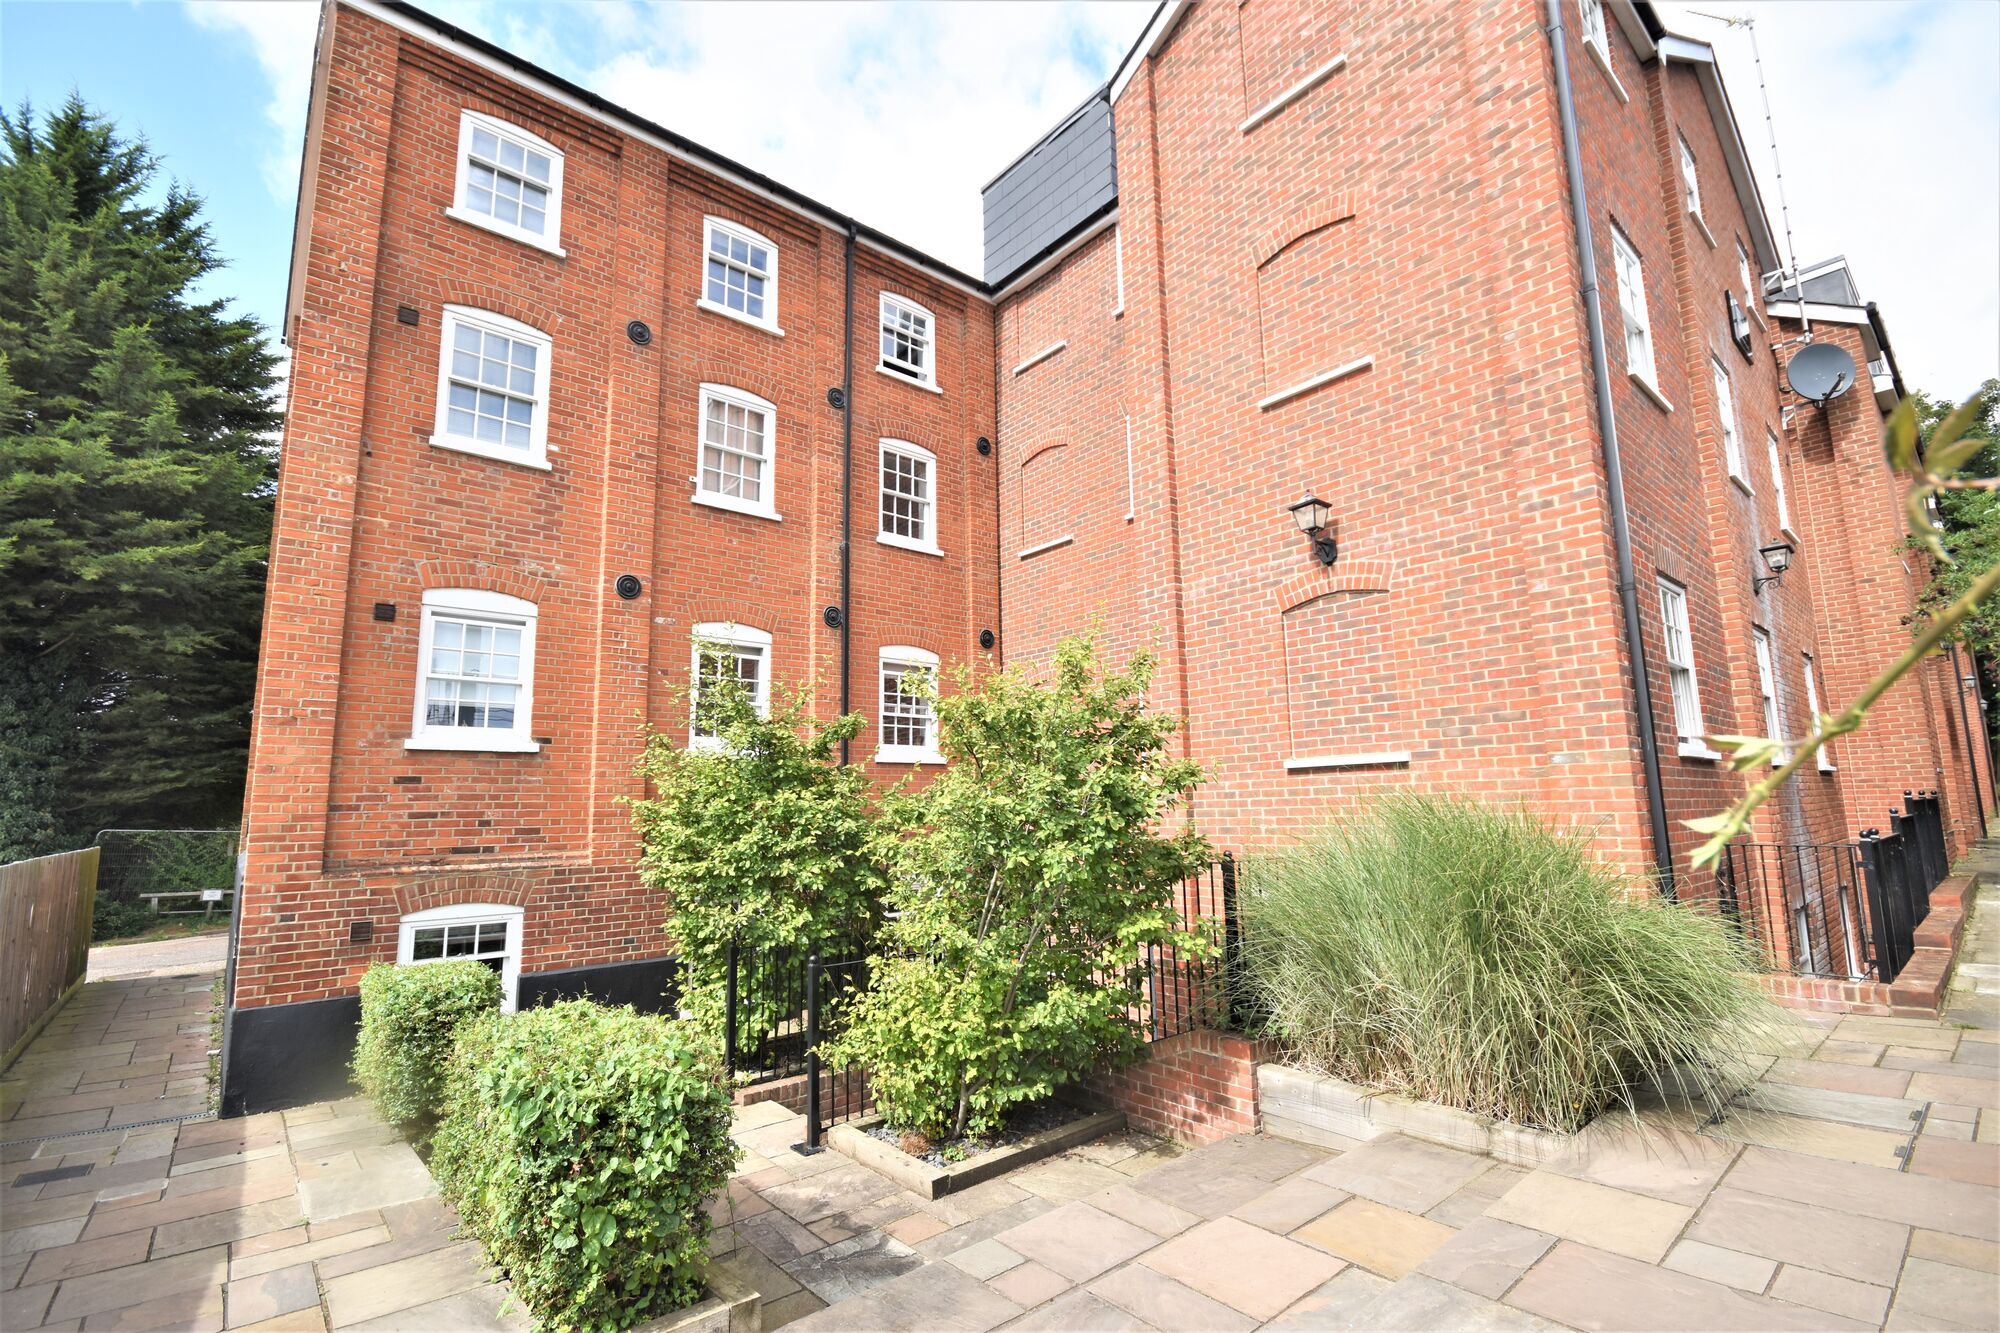 2 bedroom  flat to rent, Available from 31/05/2024 Flat 1 The Old Mill, Wendens Ambo, CB11, main image